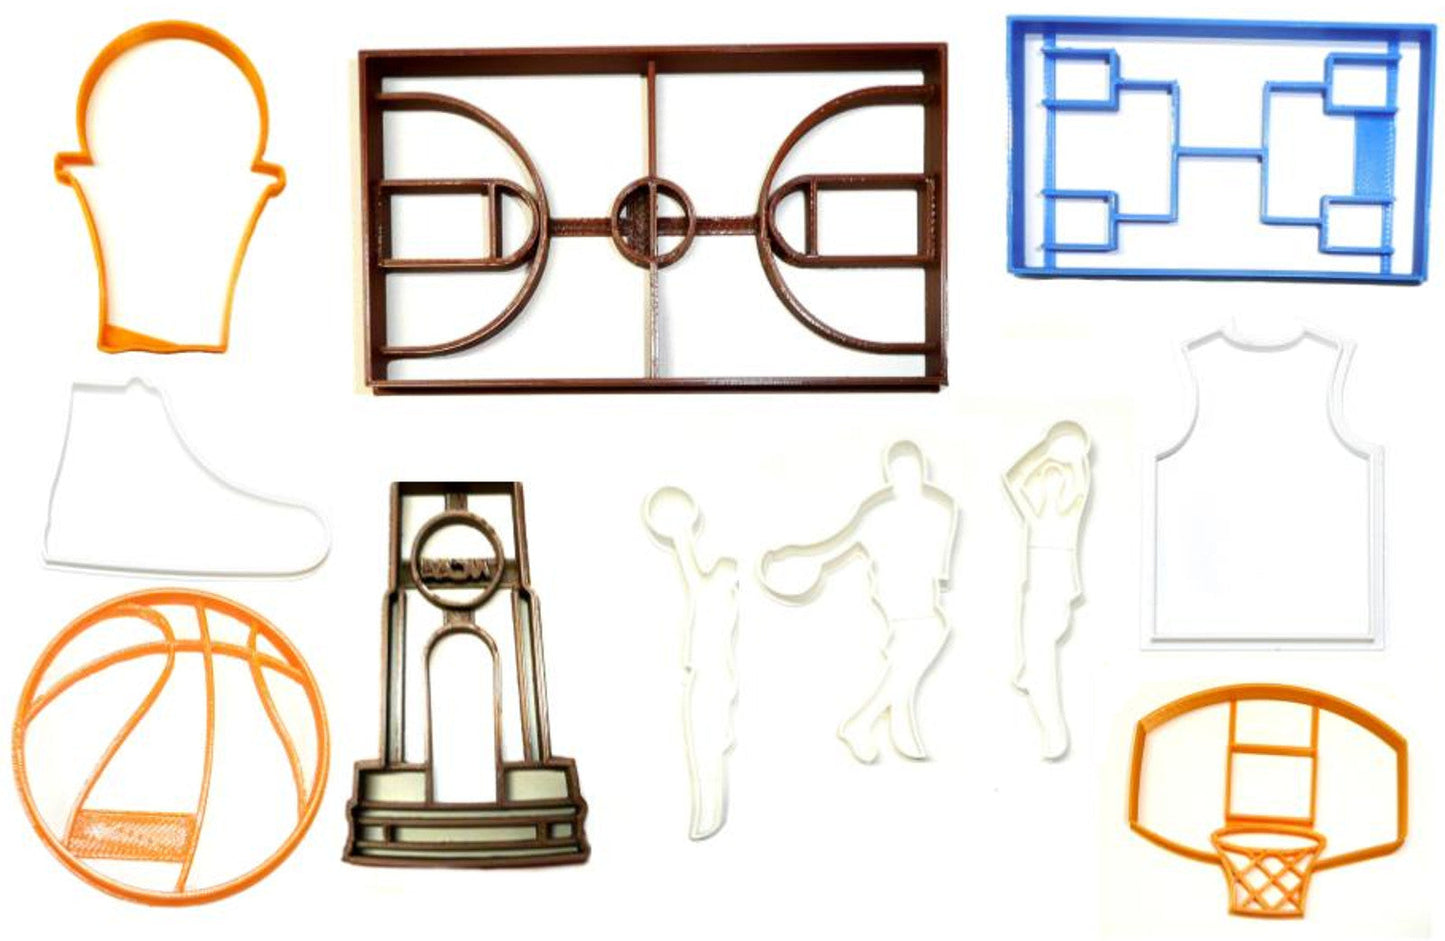 Basketball March Madness Brackets Final Four Set Of 11 Cookie Cutters USA PR1159